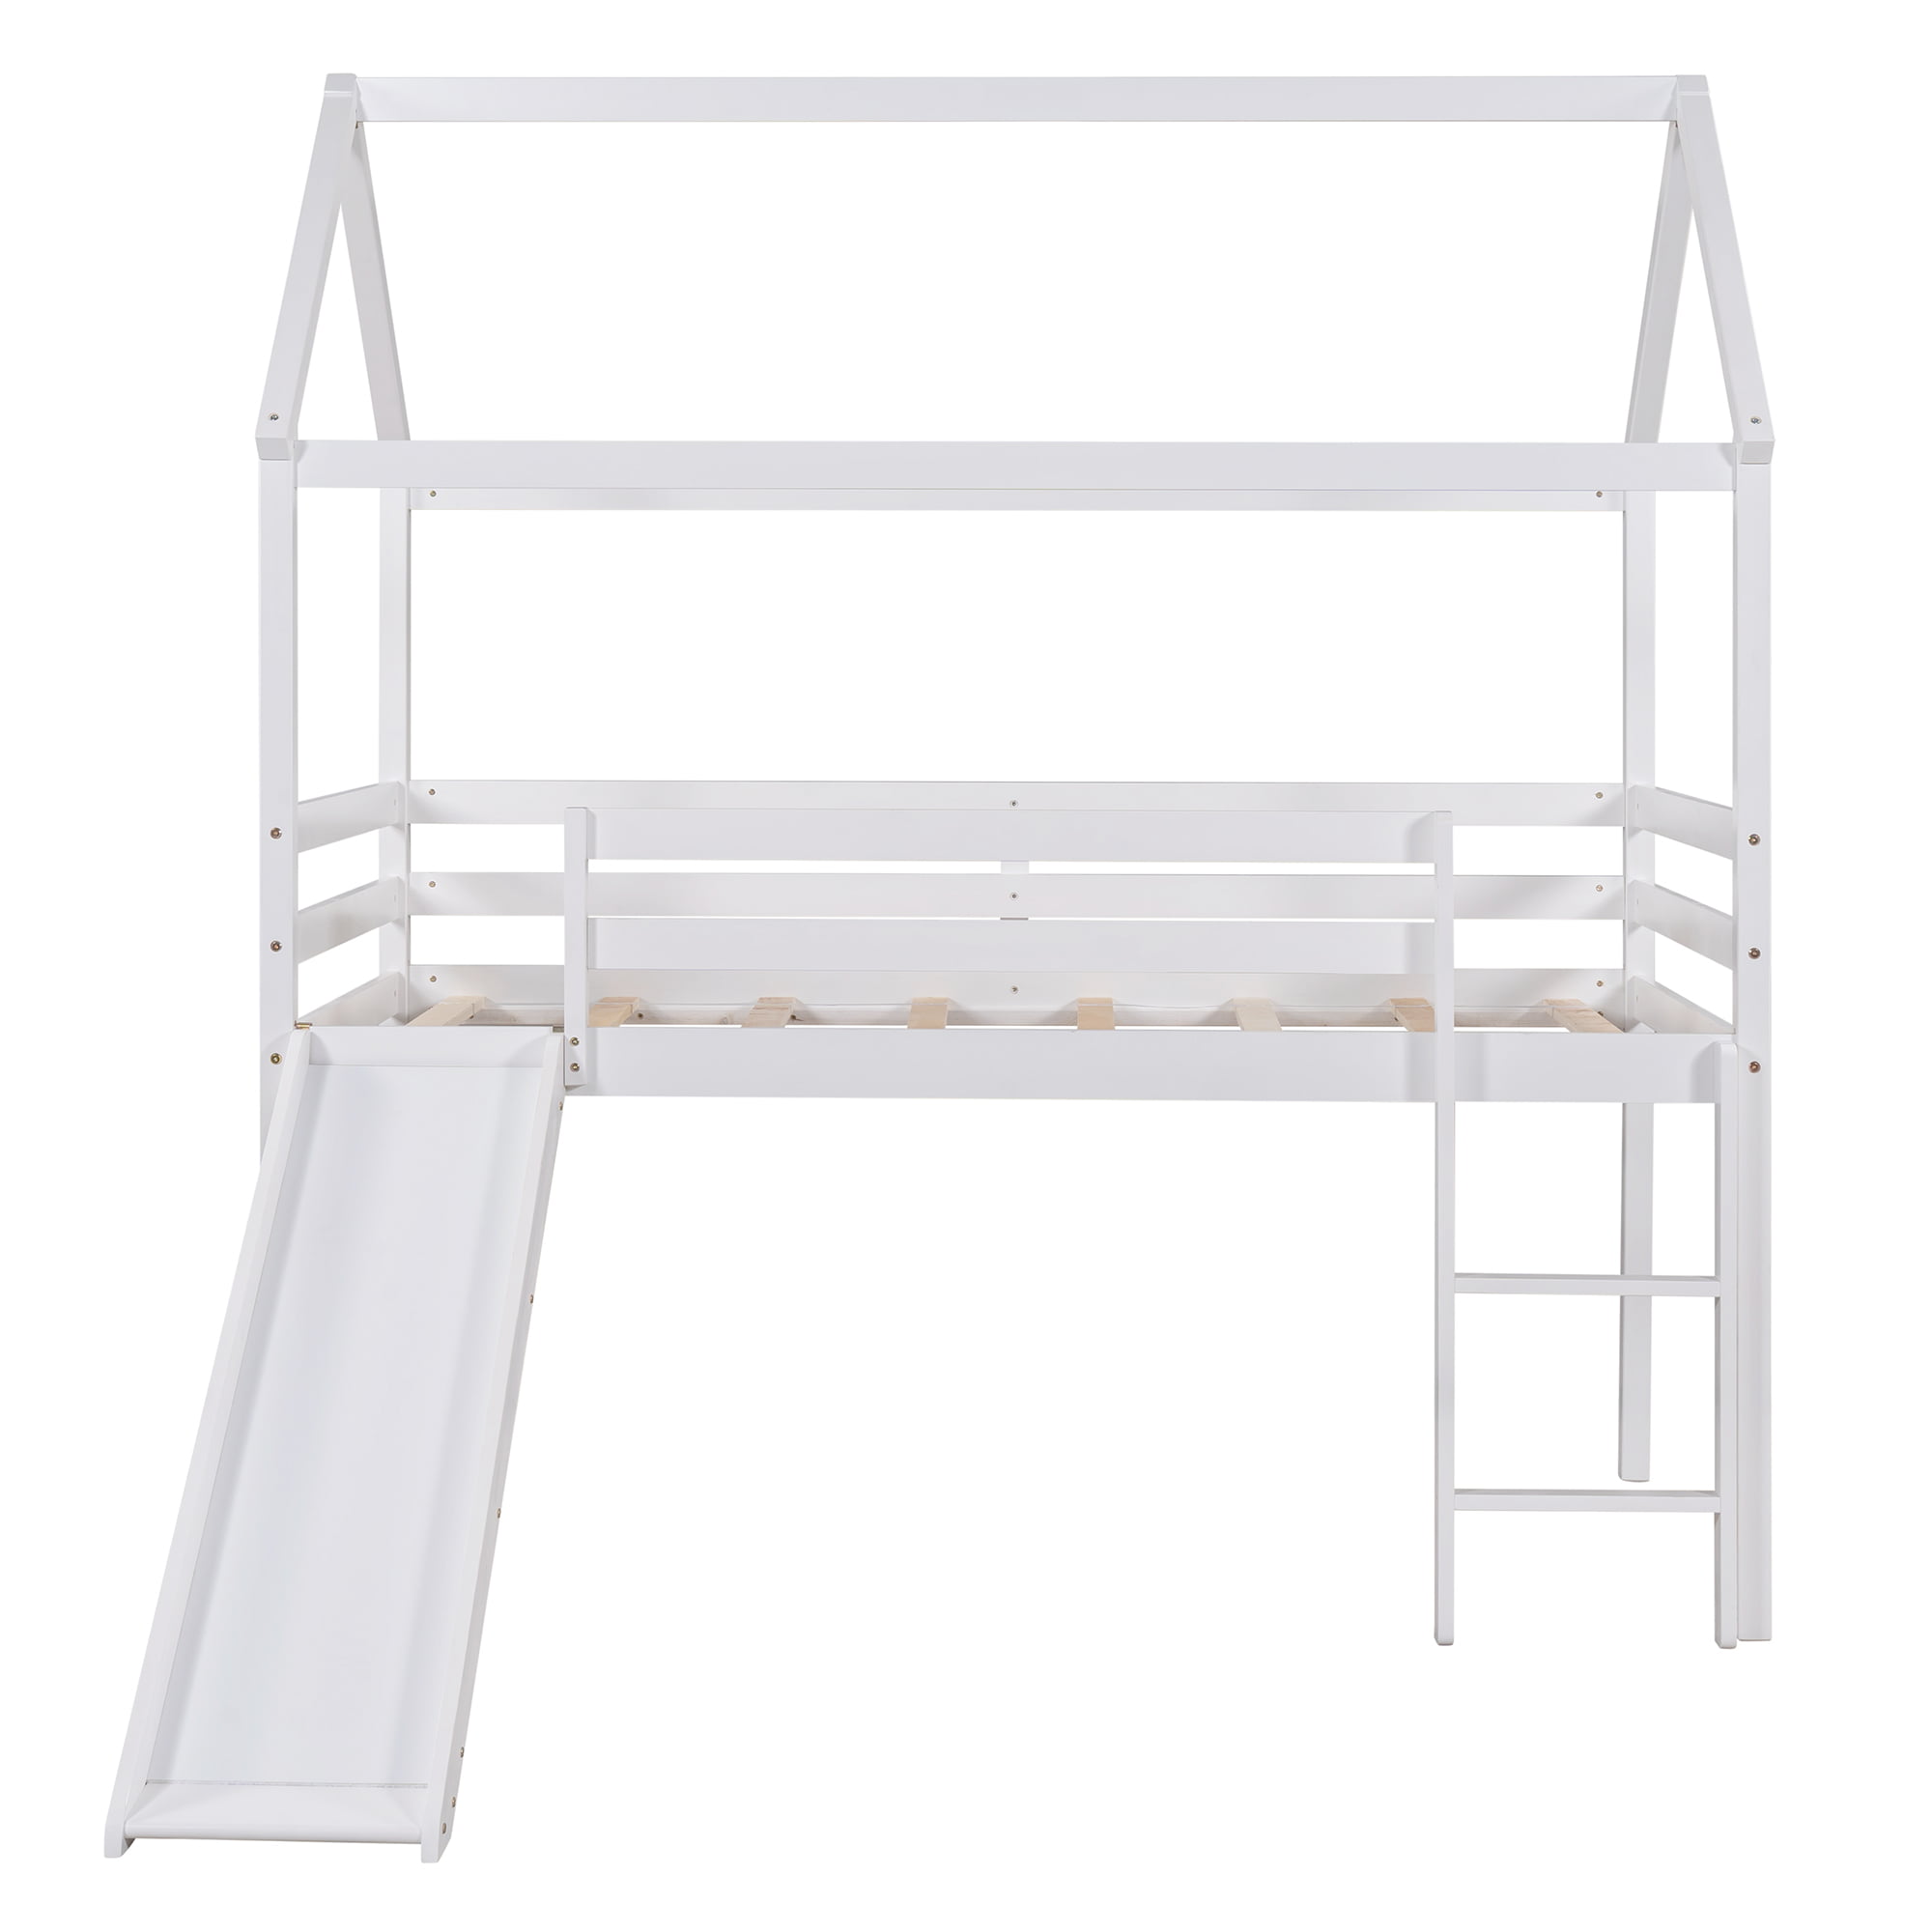 Solid Wood Twin Size High Loft Bed with Slide, Pine Wood House Bed with Slide, No Box Spring Needed Walmart.com